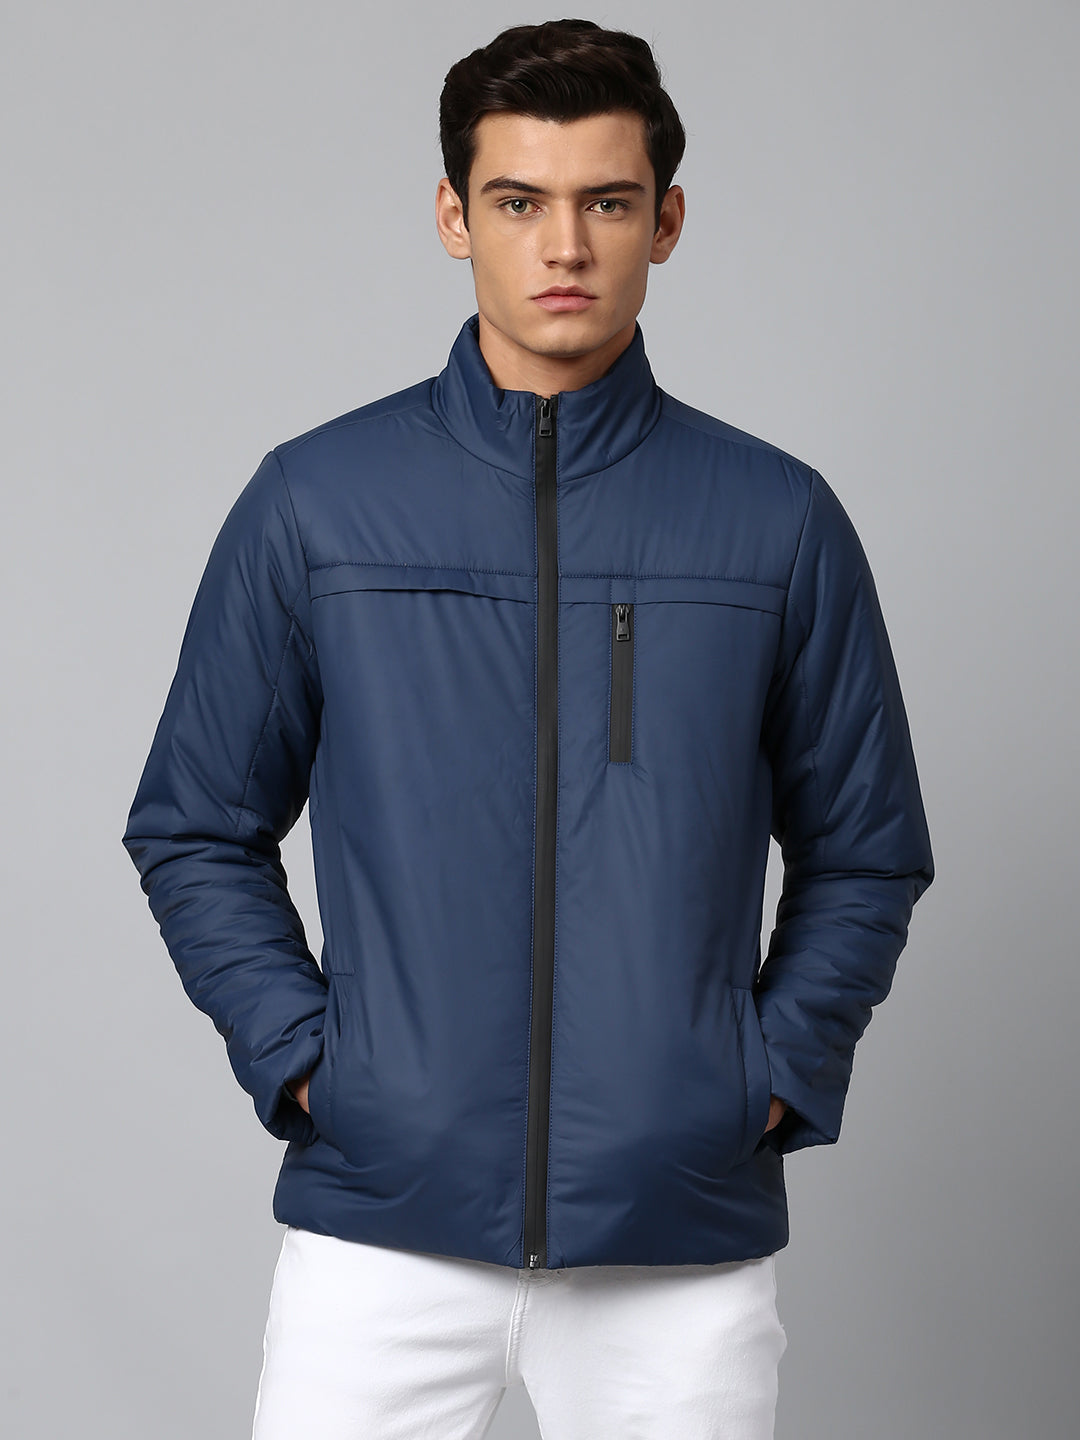 Top 5 Best Jackets For Men – Reason Clothing